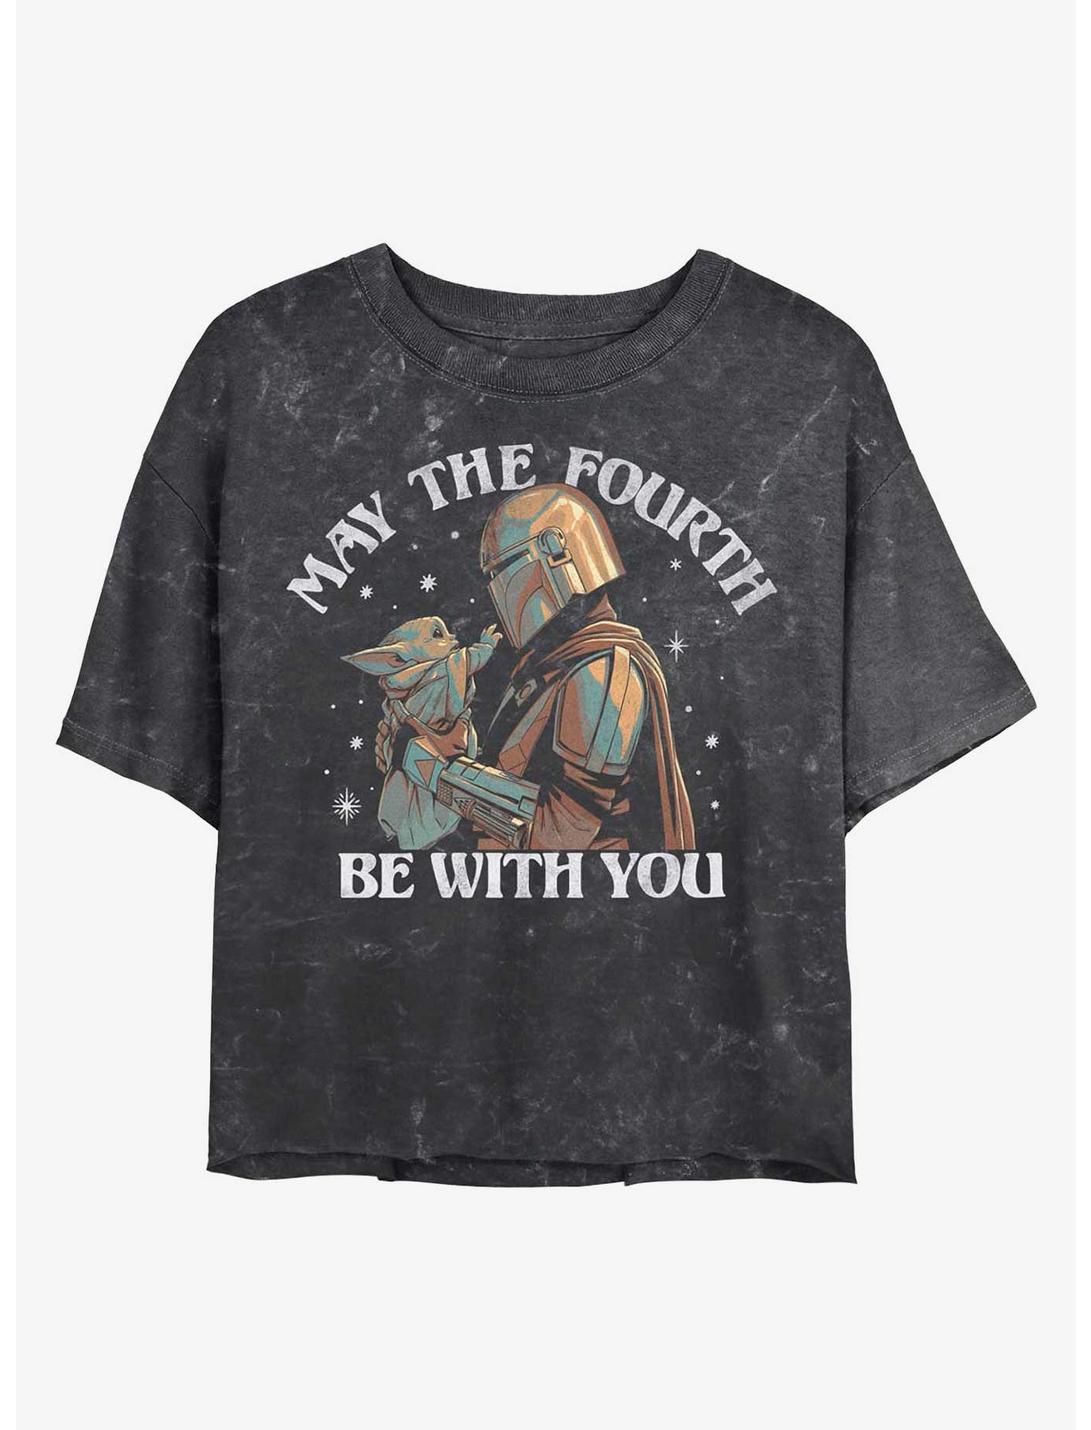 Star Wars The Mandalorian May The Fourth Be With You Mineral Wash Crop Girls T-Shirt, BLACK, hi-res